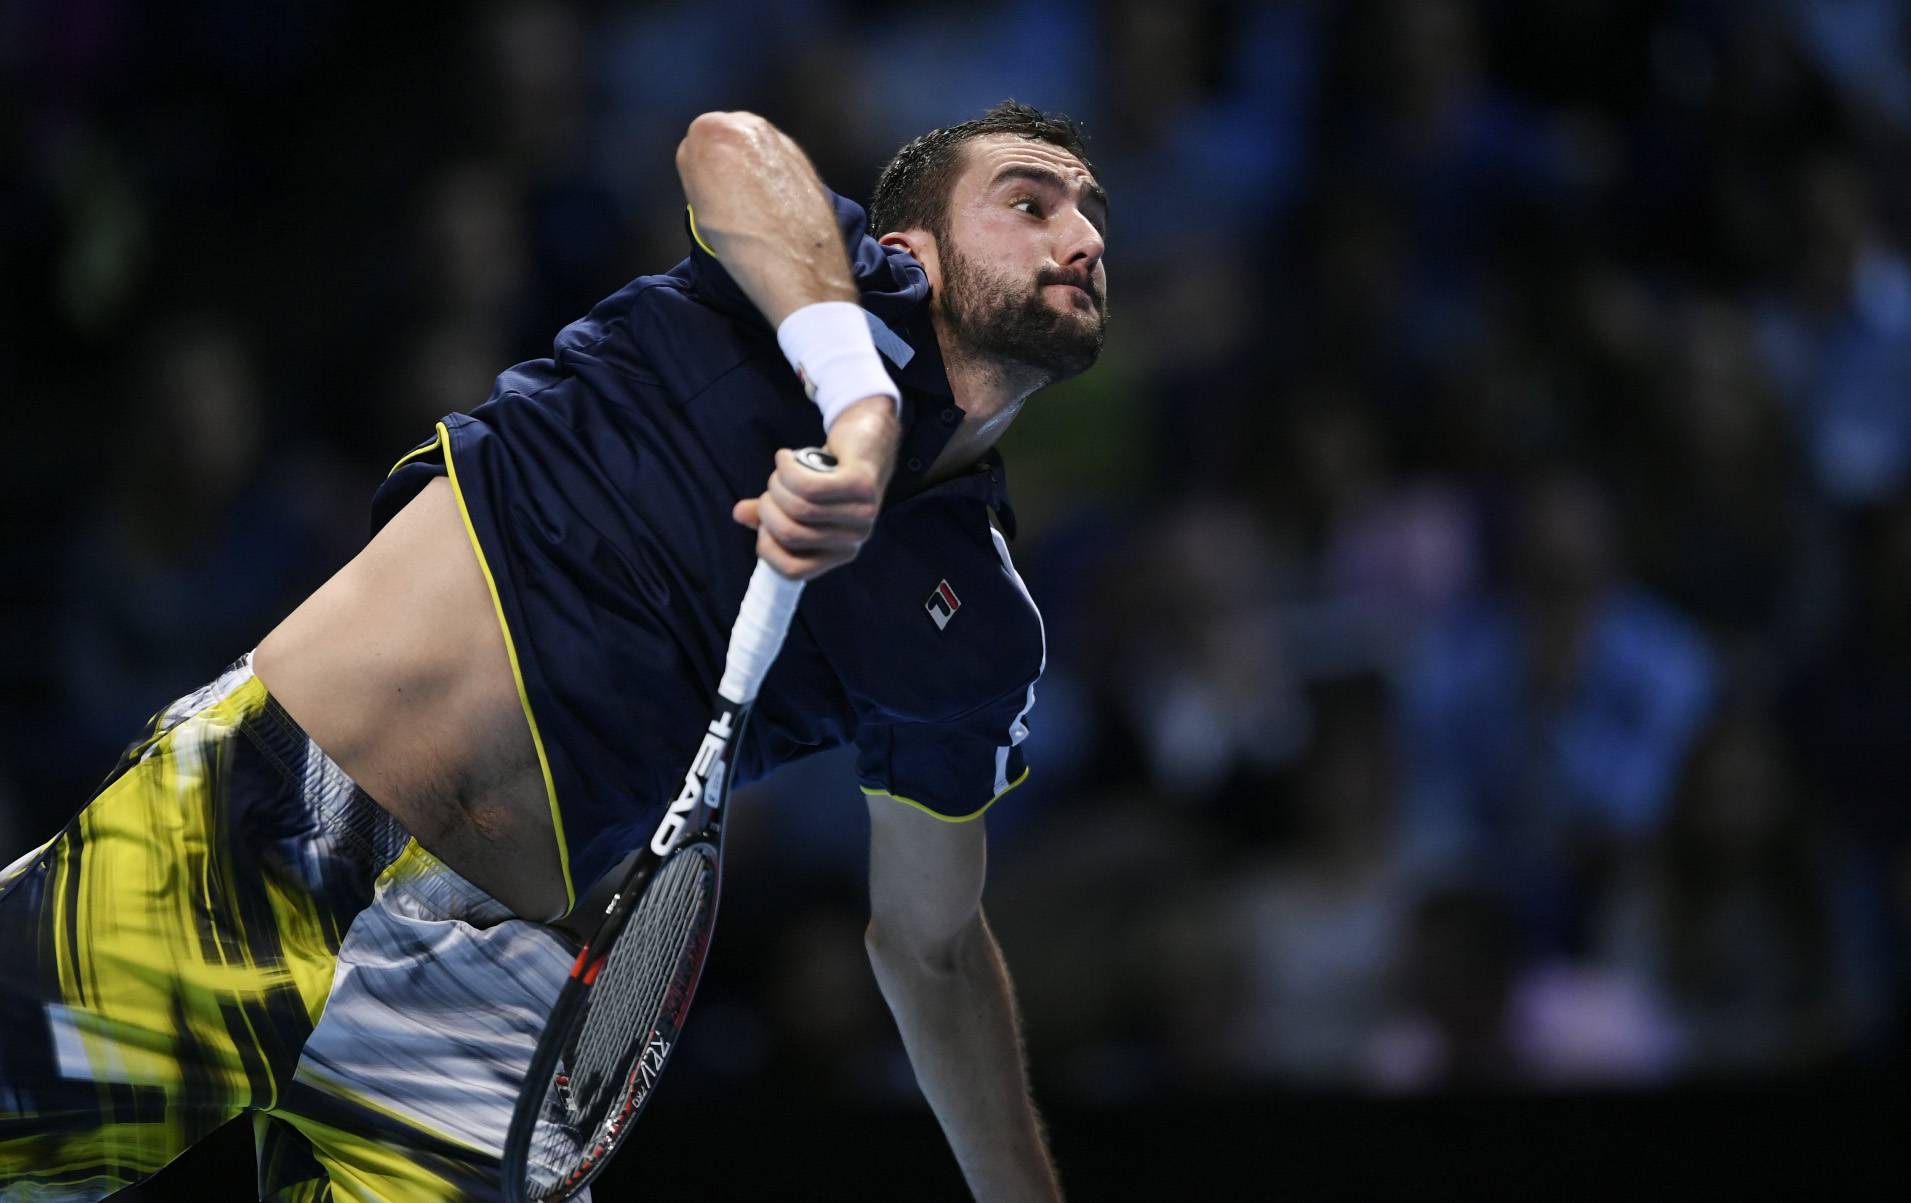 Croatia's Marin Cilic in action during his round robin match against Great Britain's Andy Murray